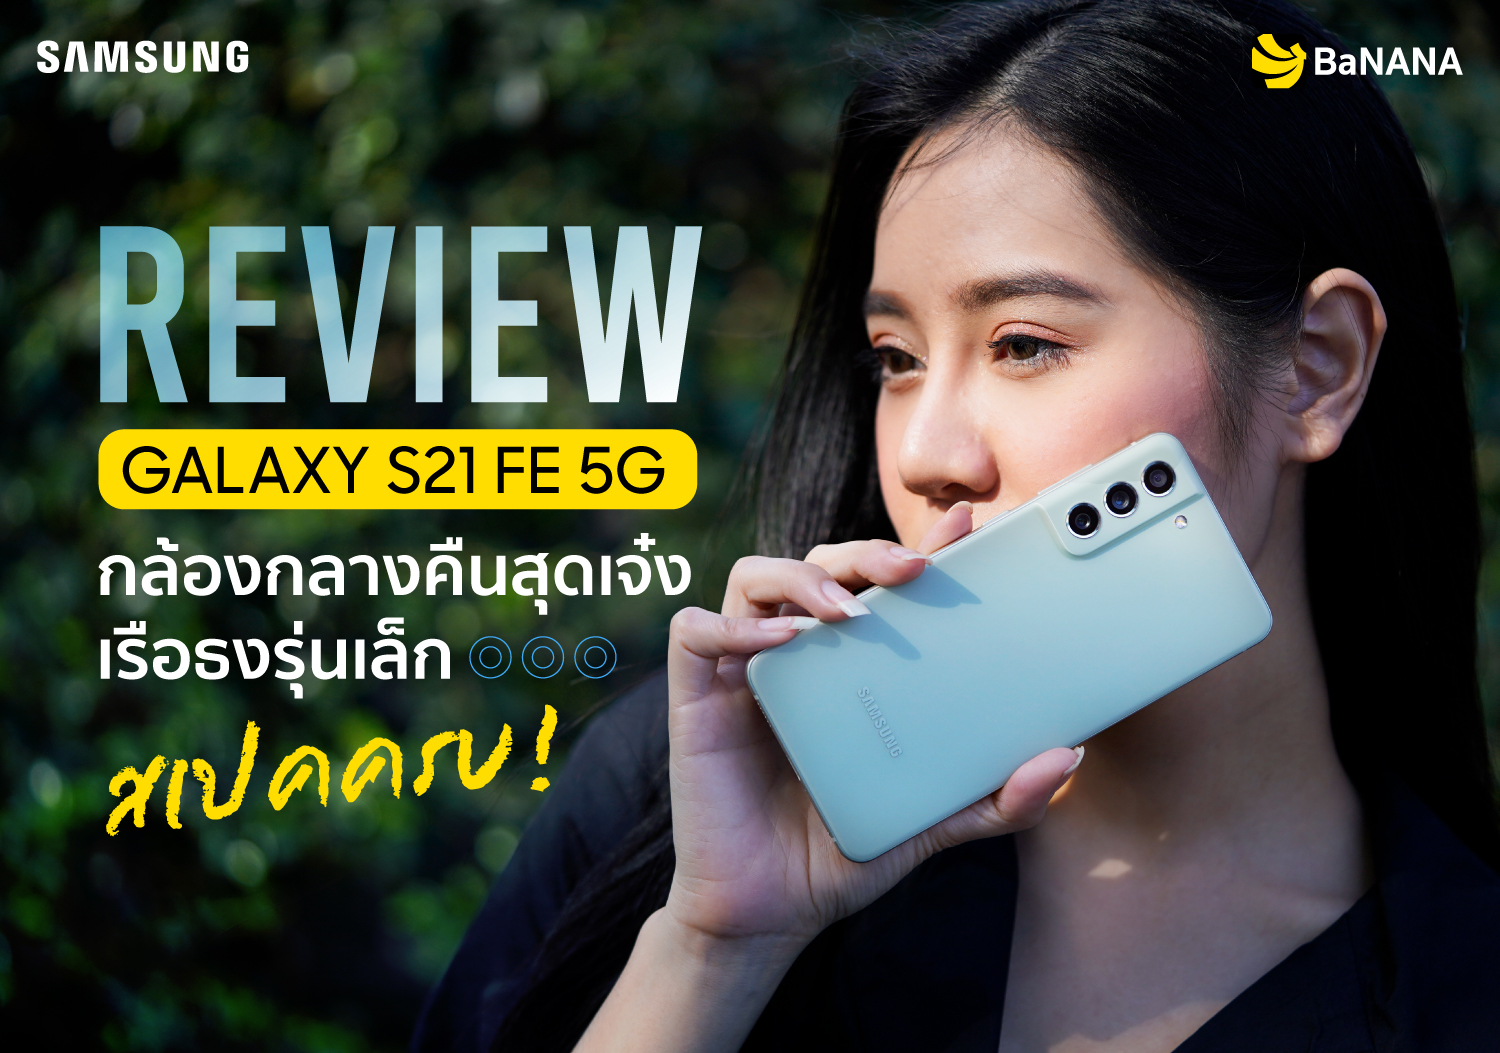 REVIEW Samsung Galaxy S21 FE 5G รีวิว